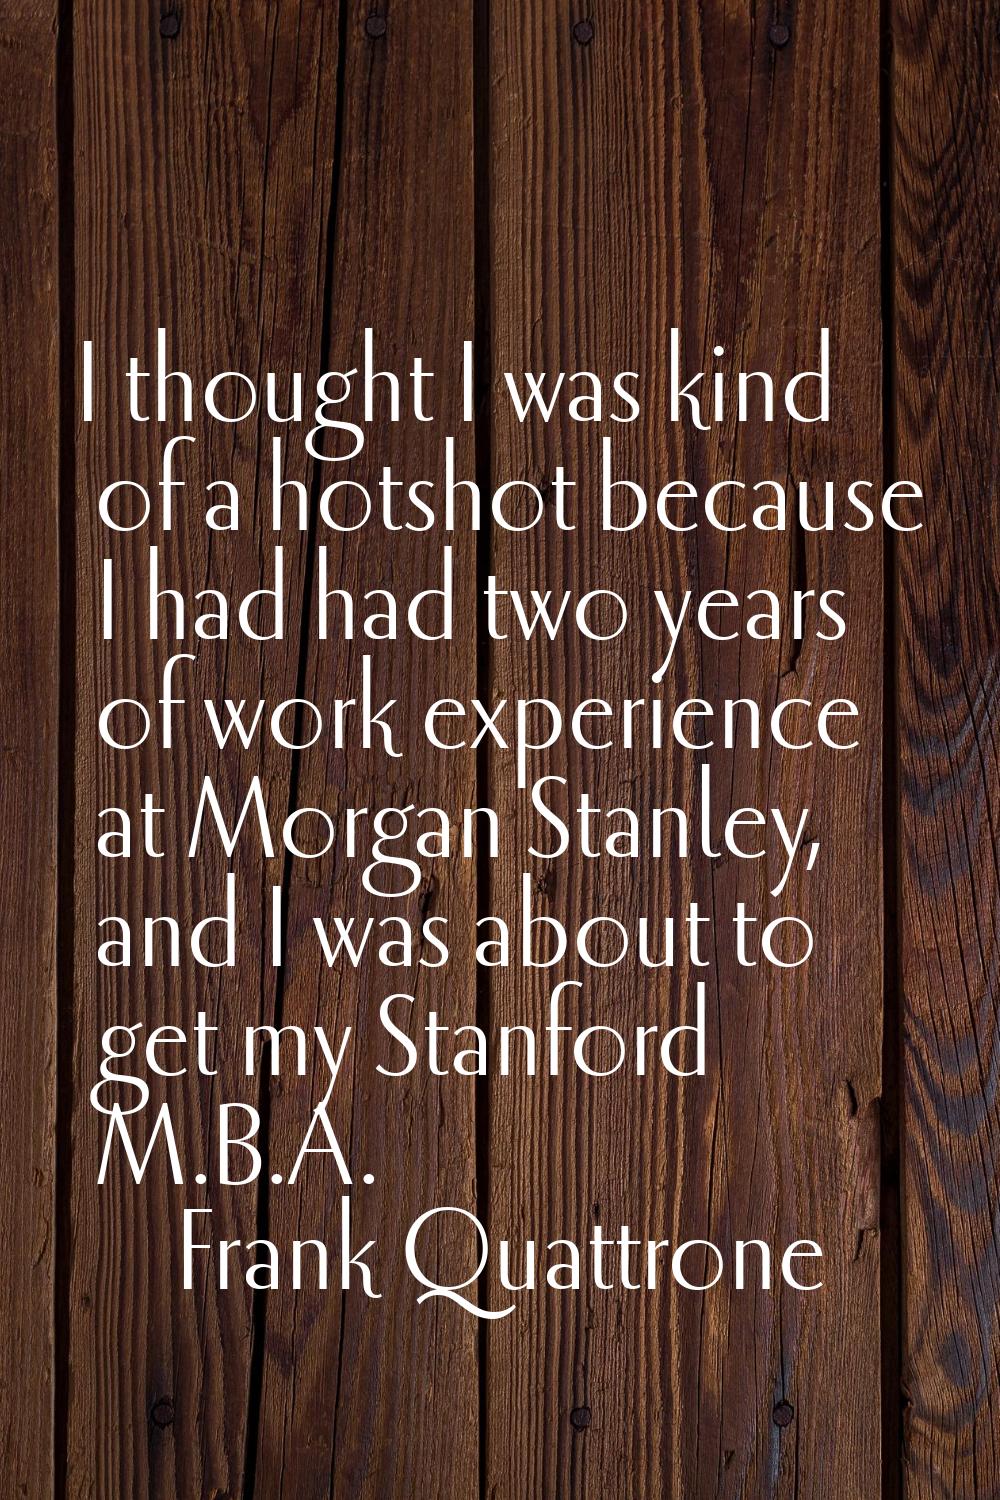 I thought I was kind of a hotshot because I had had two years of work experience at Morgan Stanley,